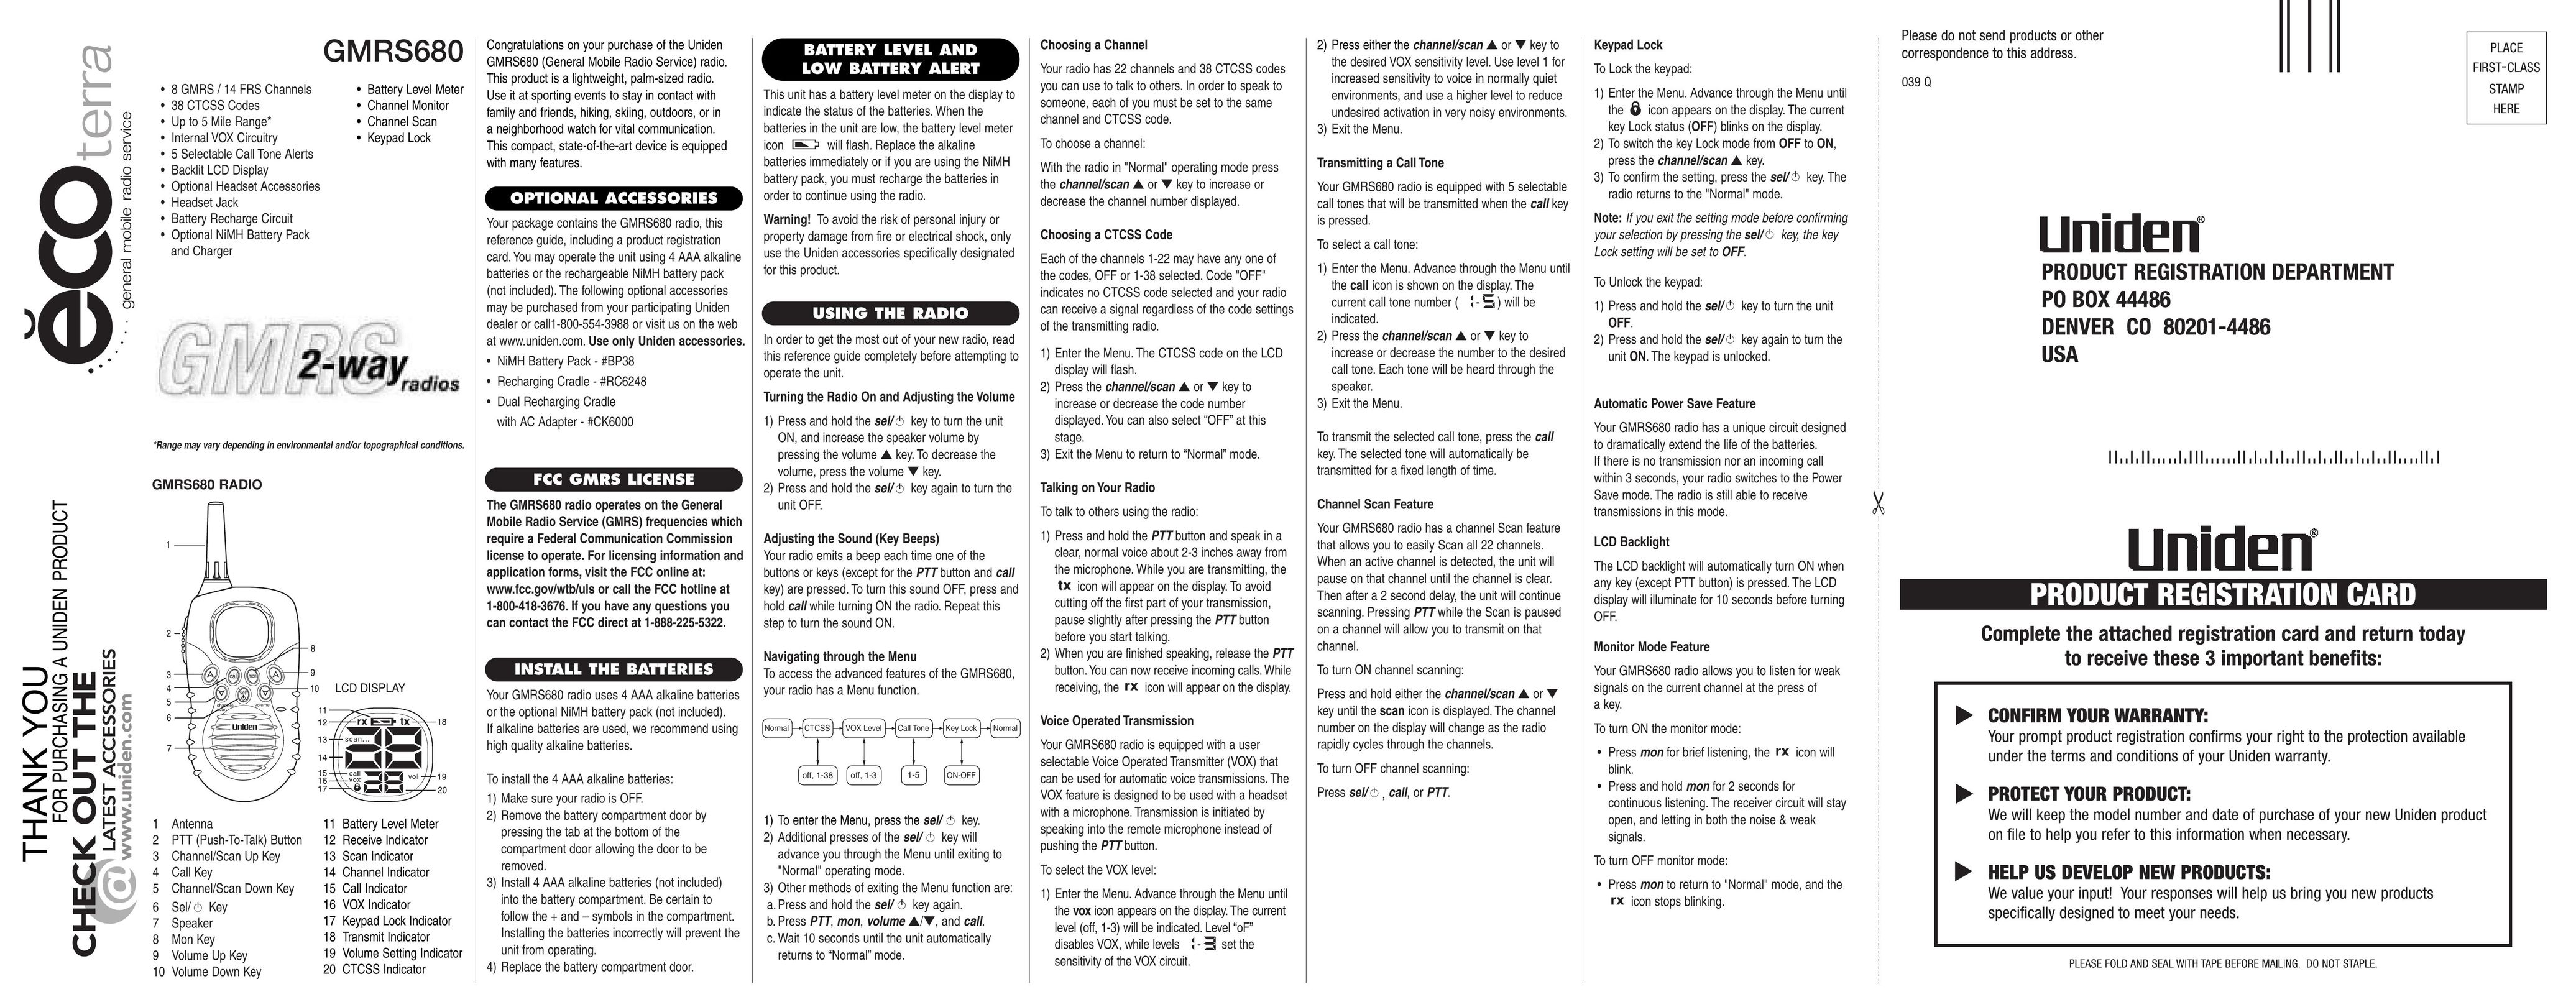 Uniden GMRS680 Two-Way Radio User Manual